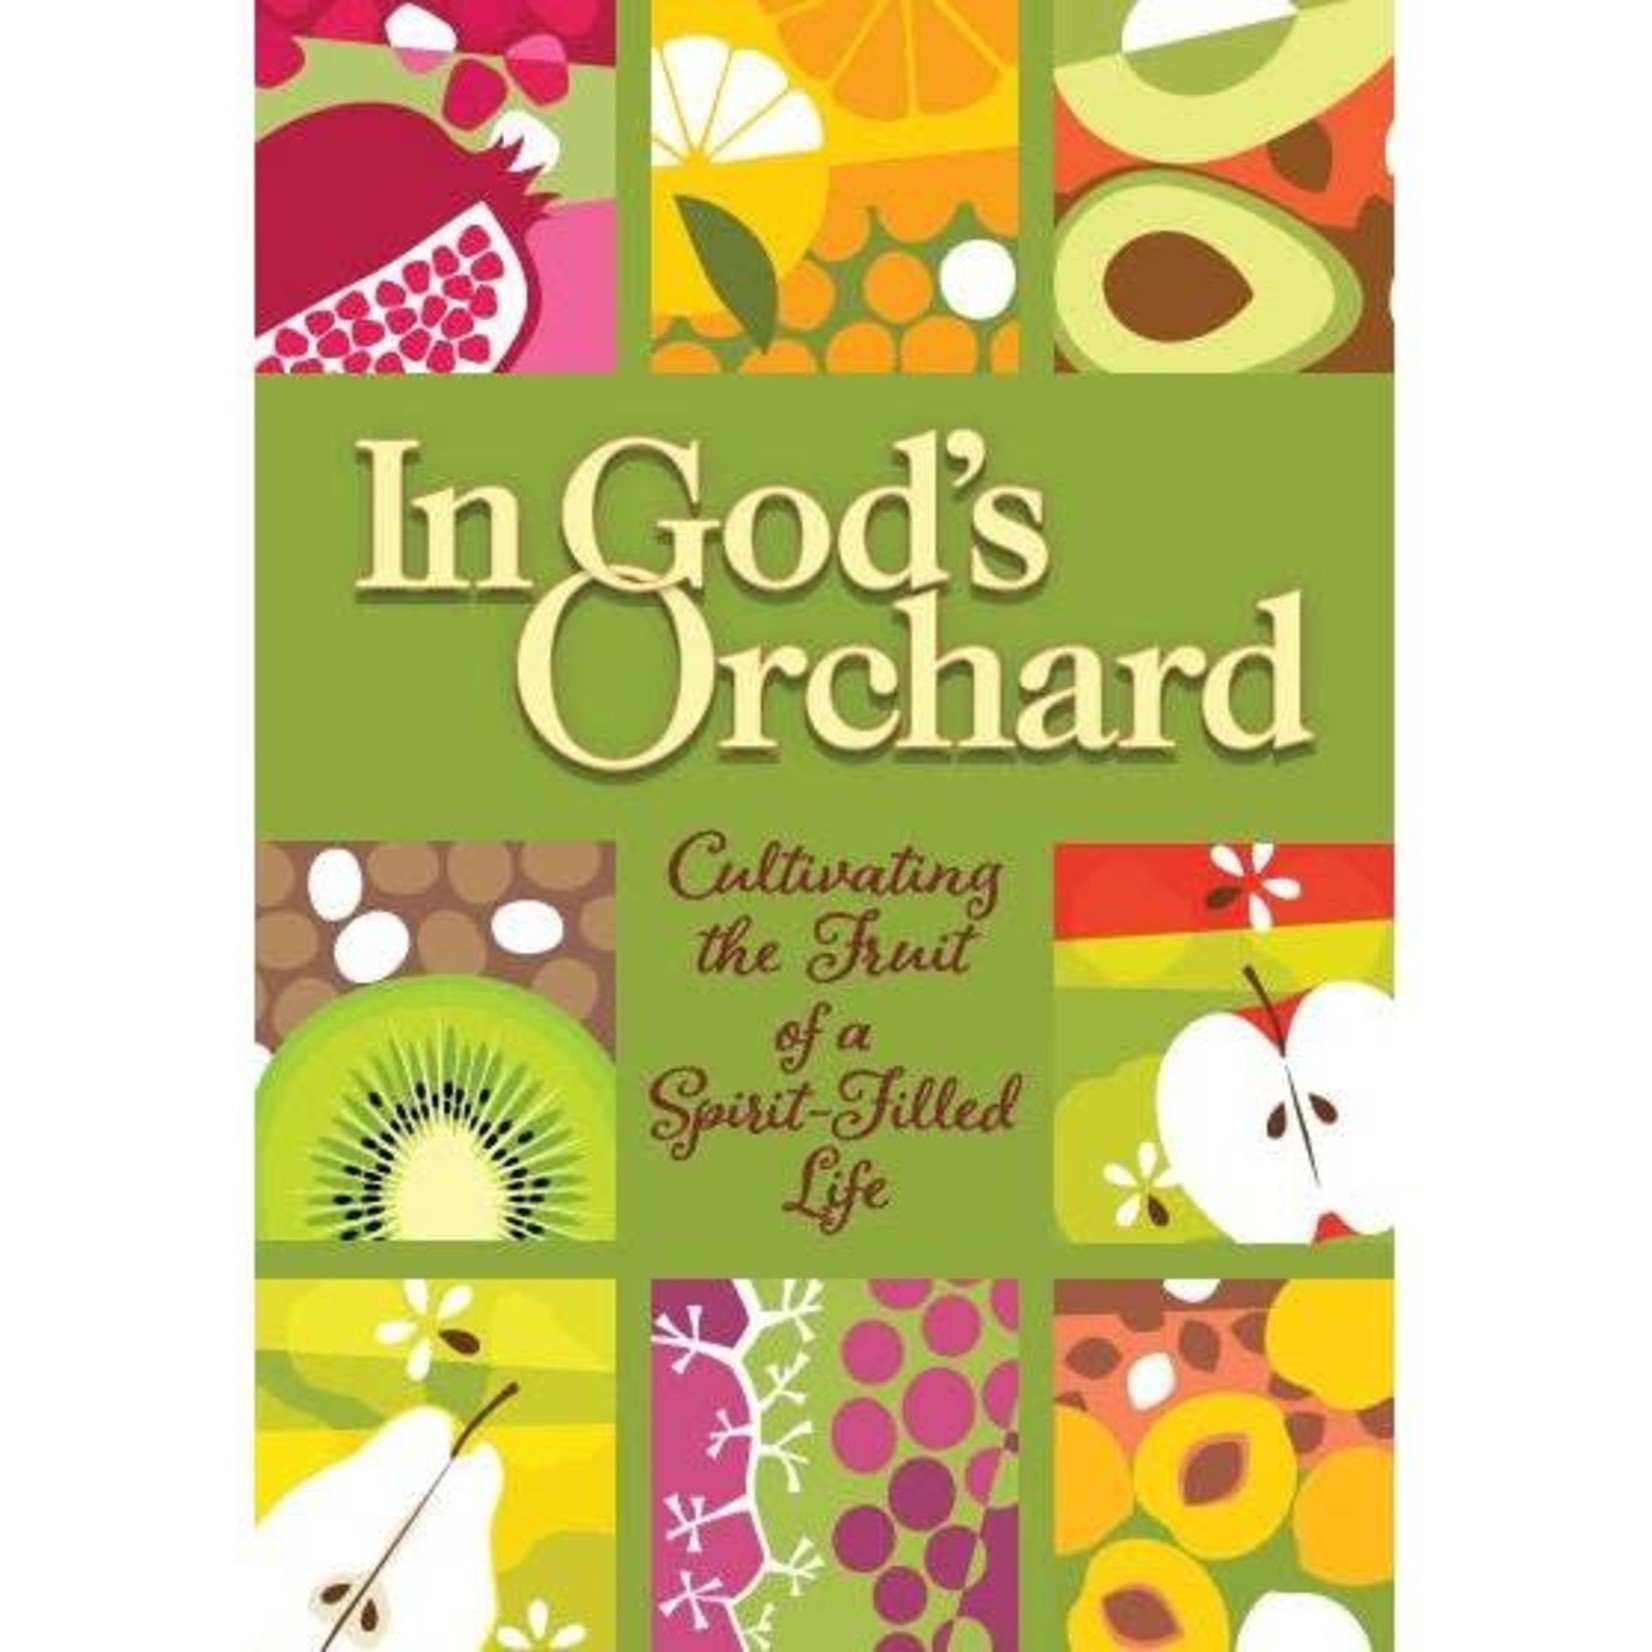 In God's Orchard - Cultivating the Fruit of a Spirit-Filled Life